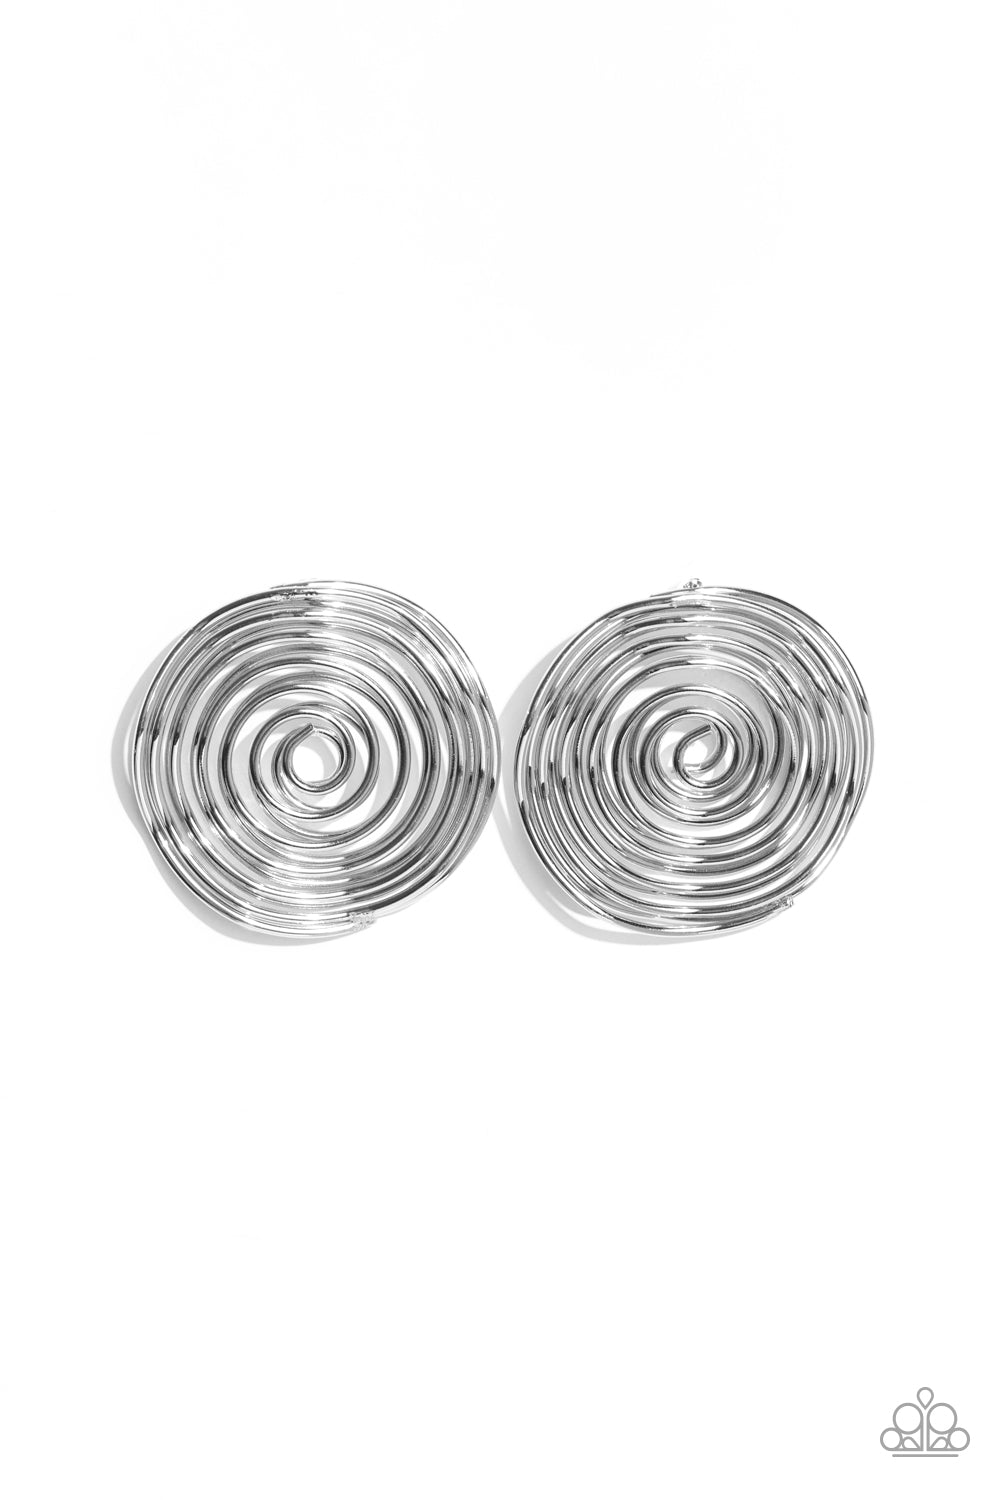 COIL Over Silver Earrings - Paparazzi Accessories- lightbox - CarasShop.com - $5 Jewelry by Cara Jewels